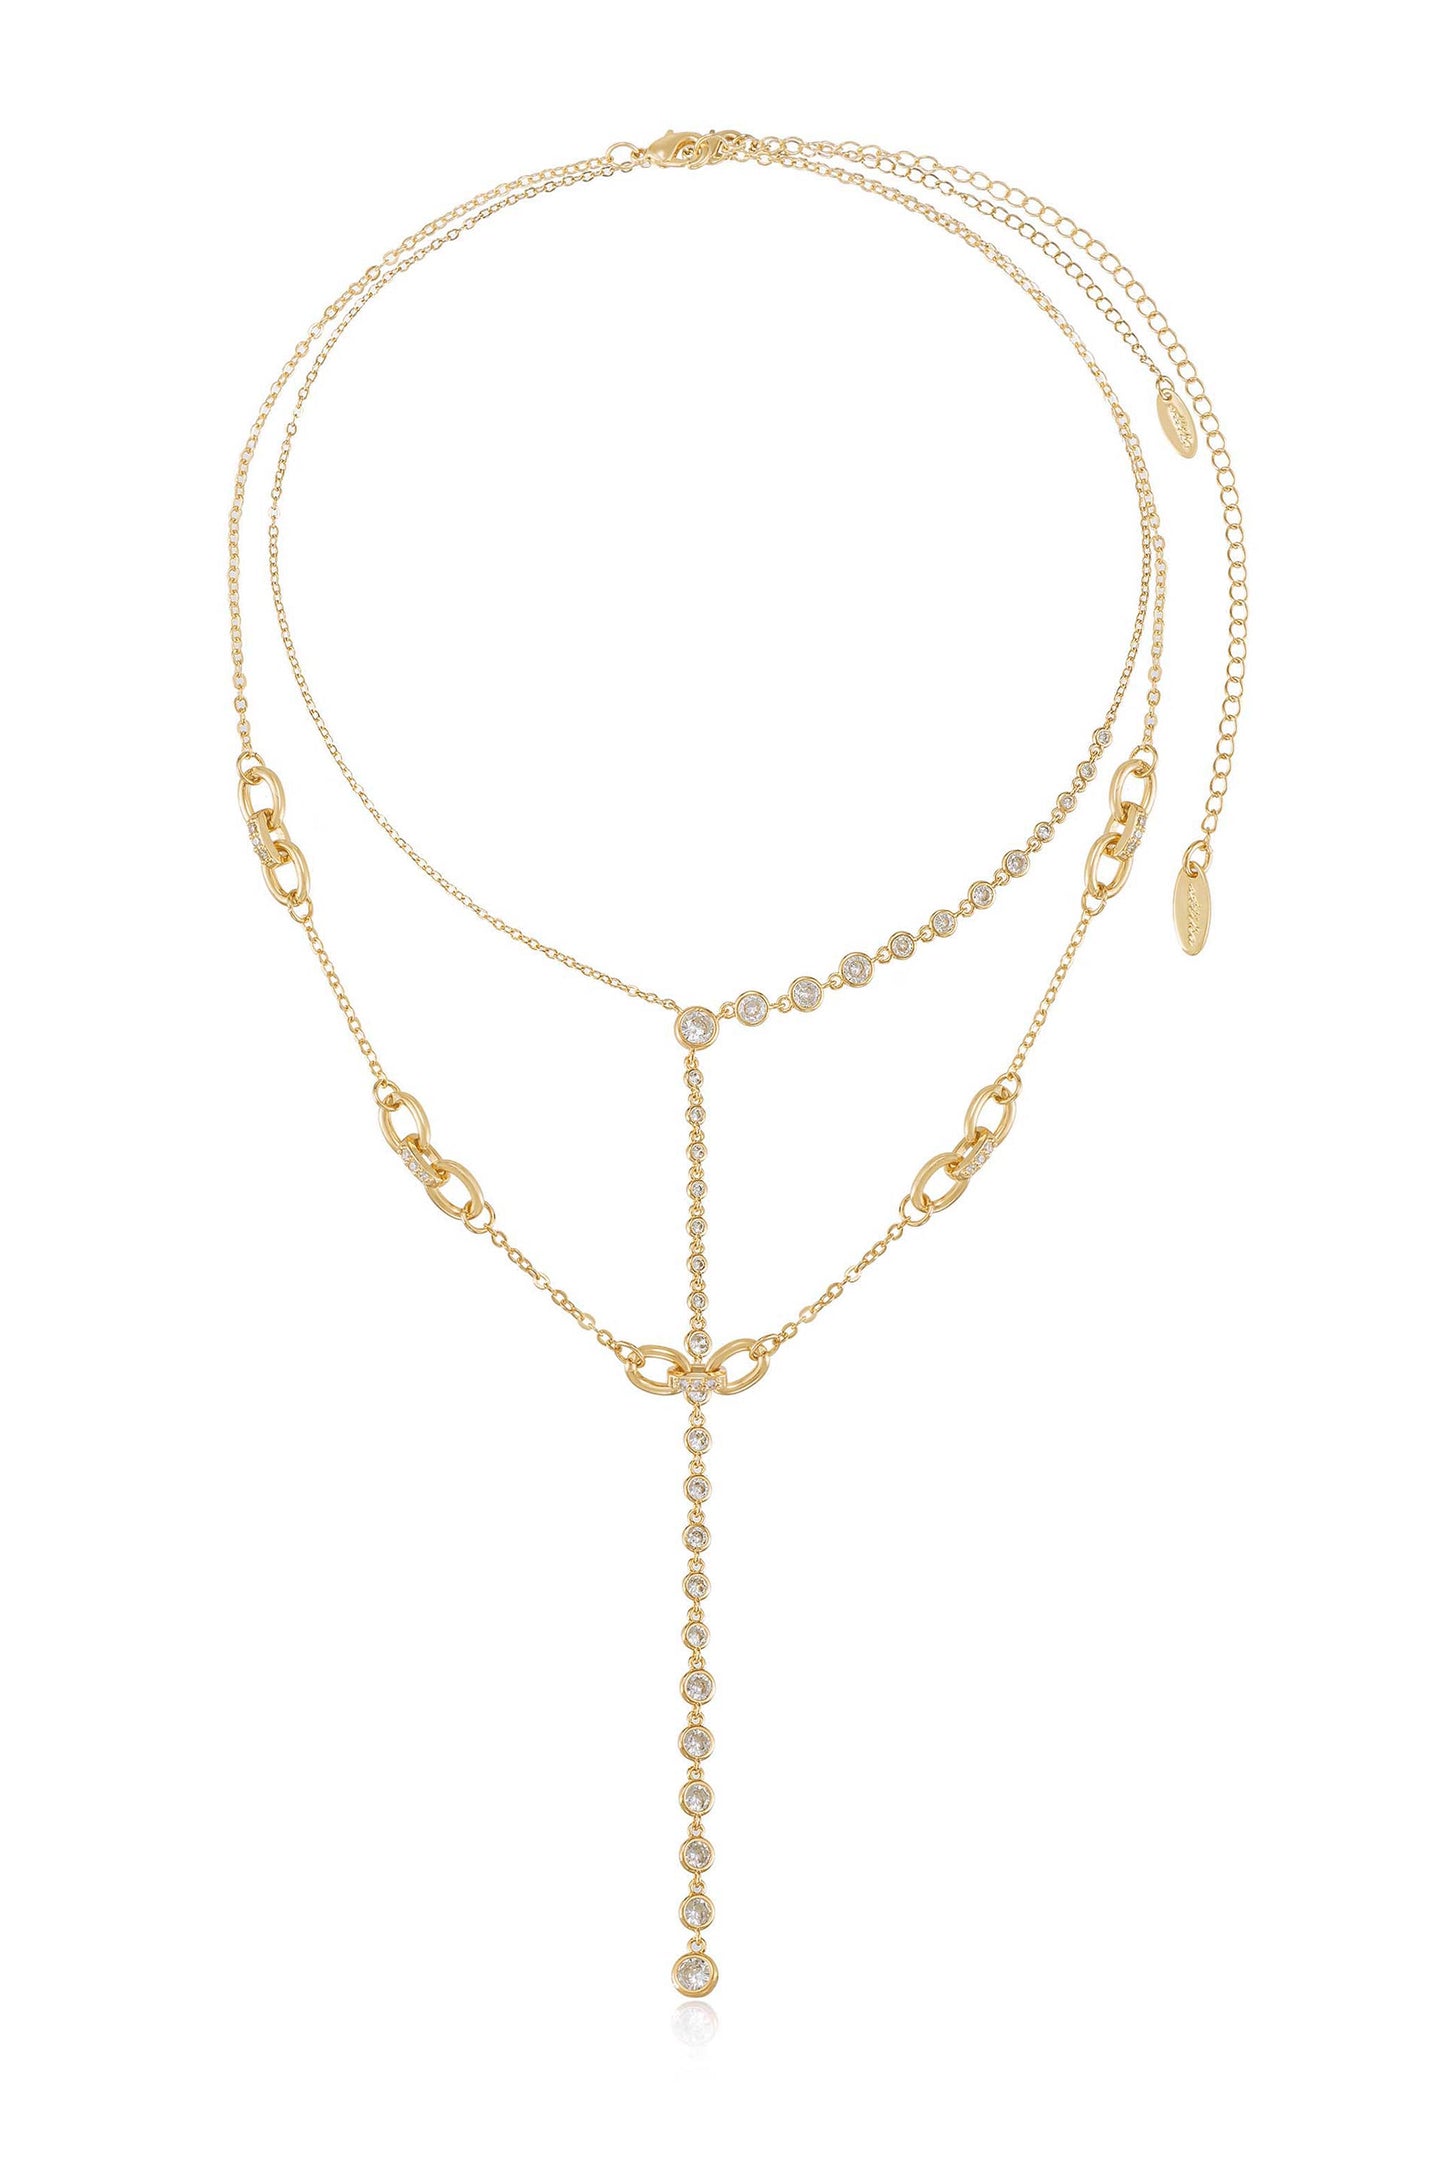 Asymmetrical Crystals Lariat 18k Gold Plated Necklace Set full